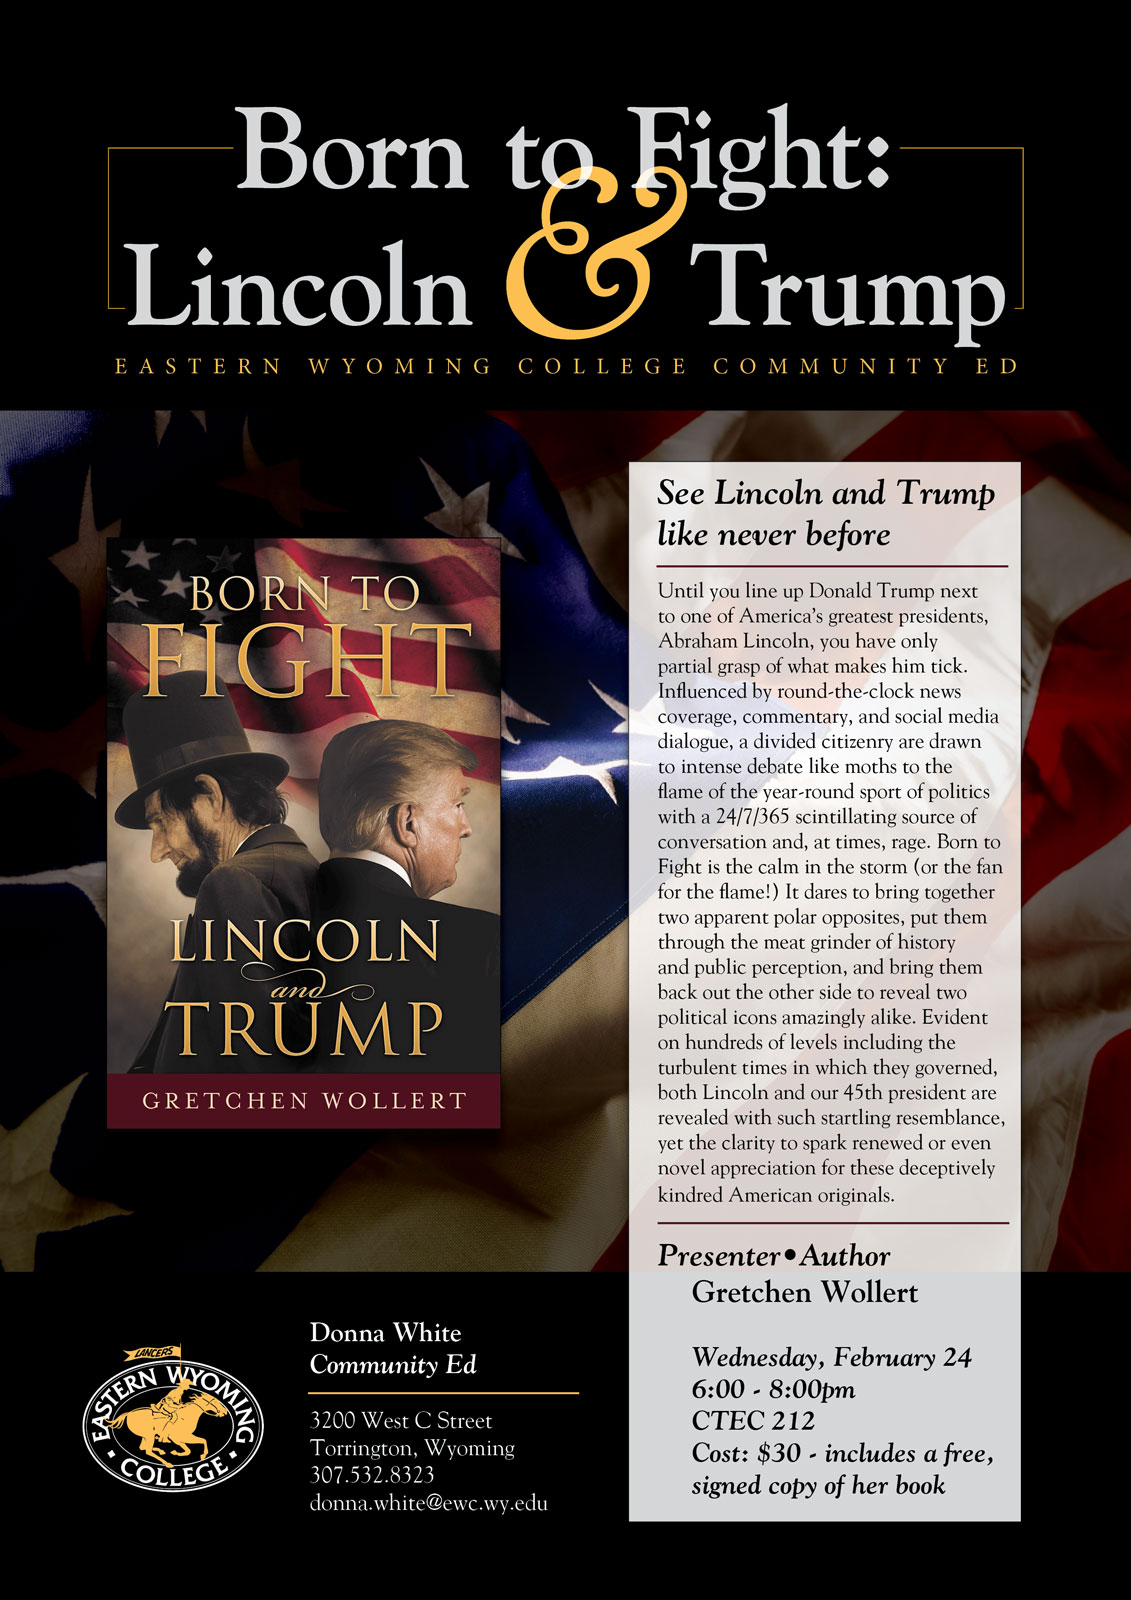 Eastern Wyoming College Community Ed - Born to Fight: Lincoln & Trump